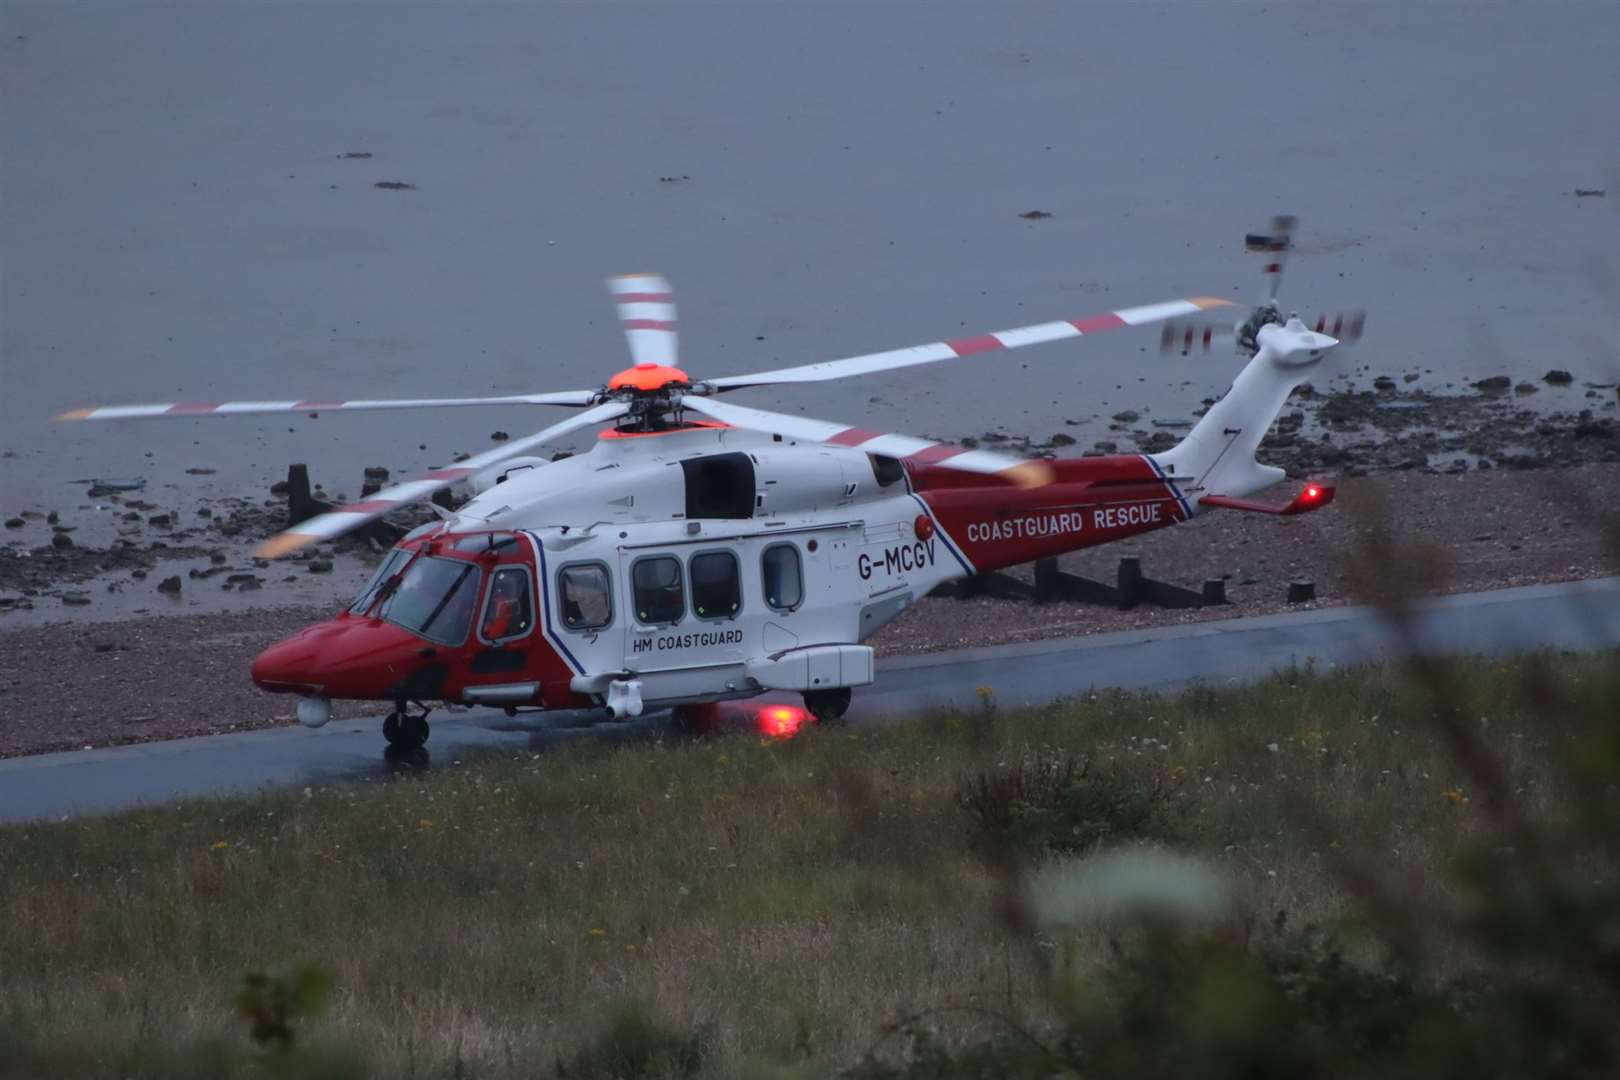 The coastguard deployed a helicopter in the rescue effort. Archive picture